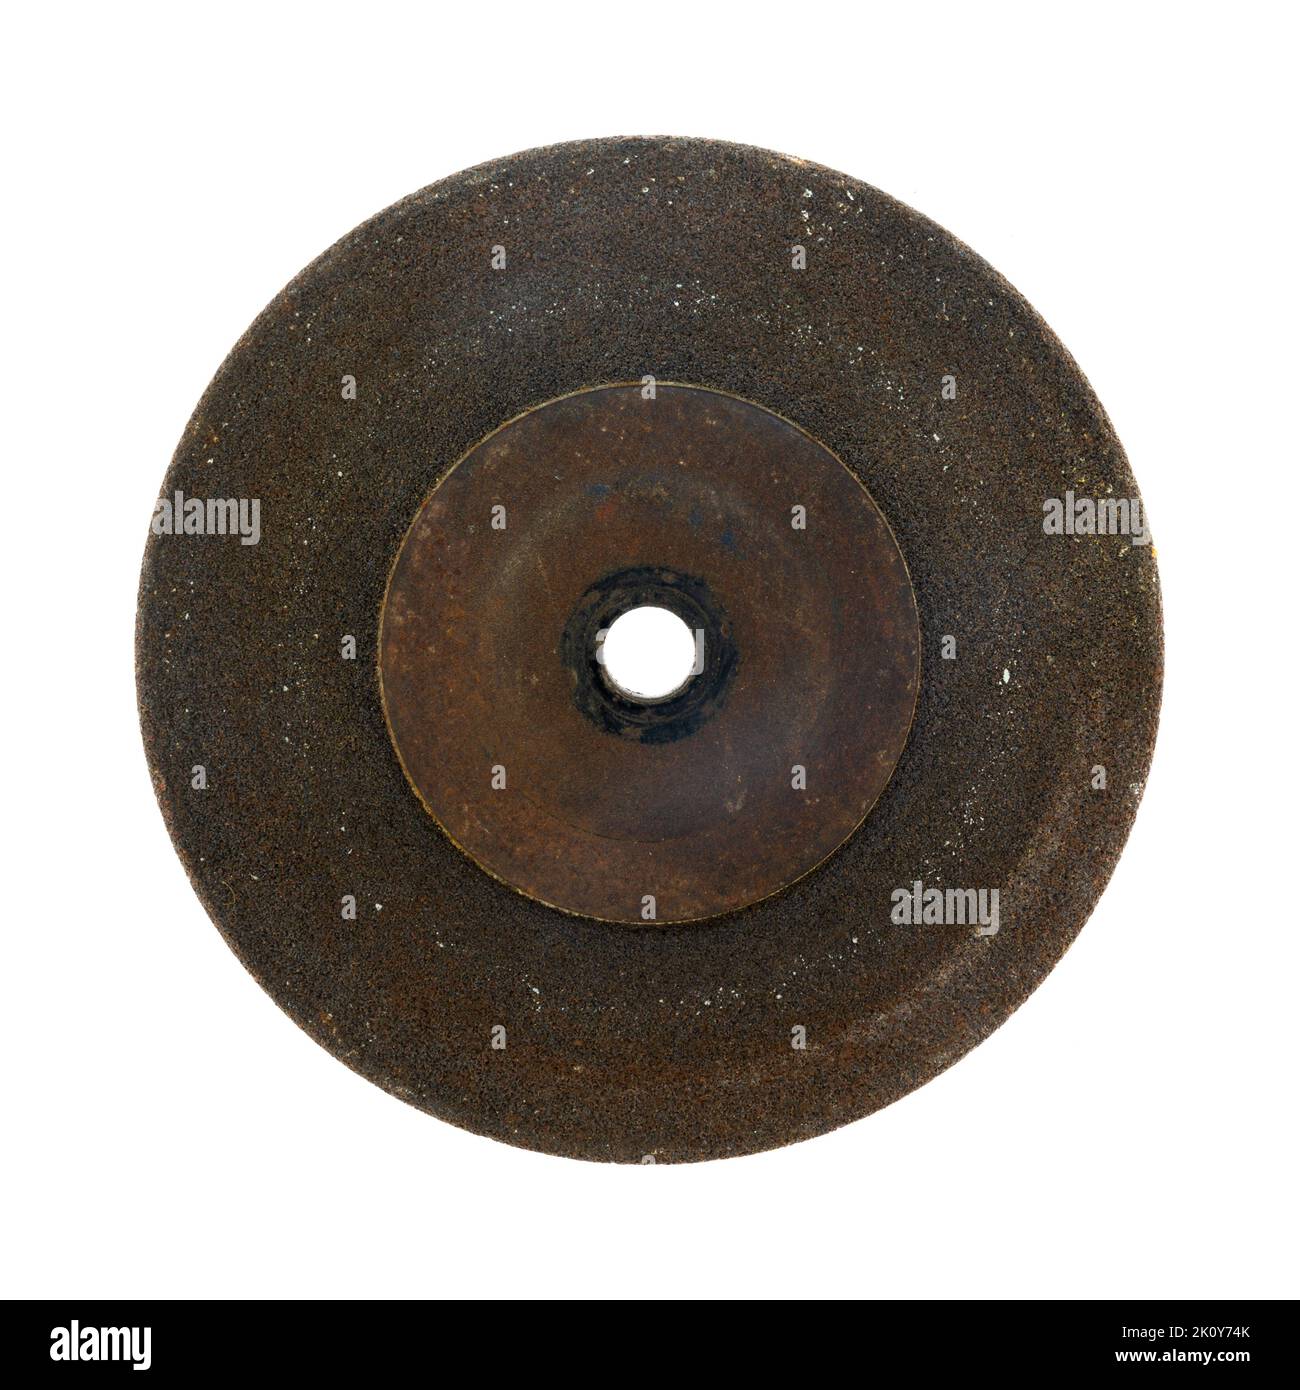 Old worn and used grinding wheel isolated on a white background. Stock Photo